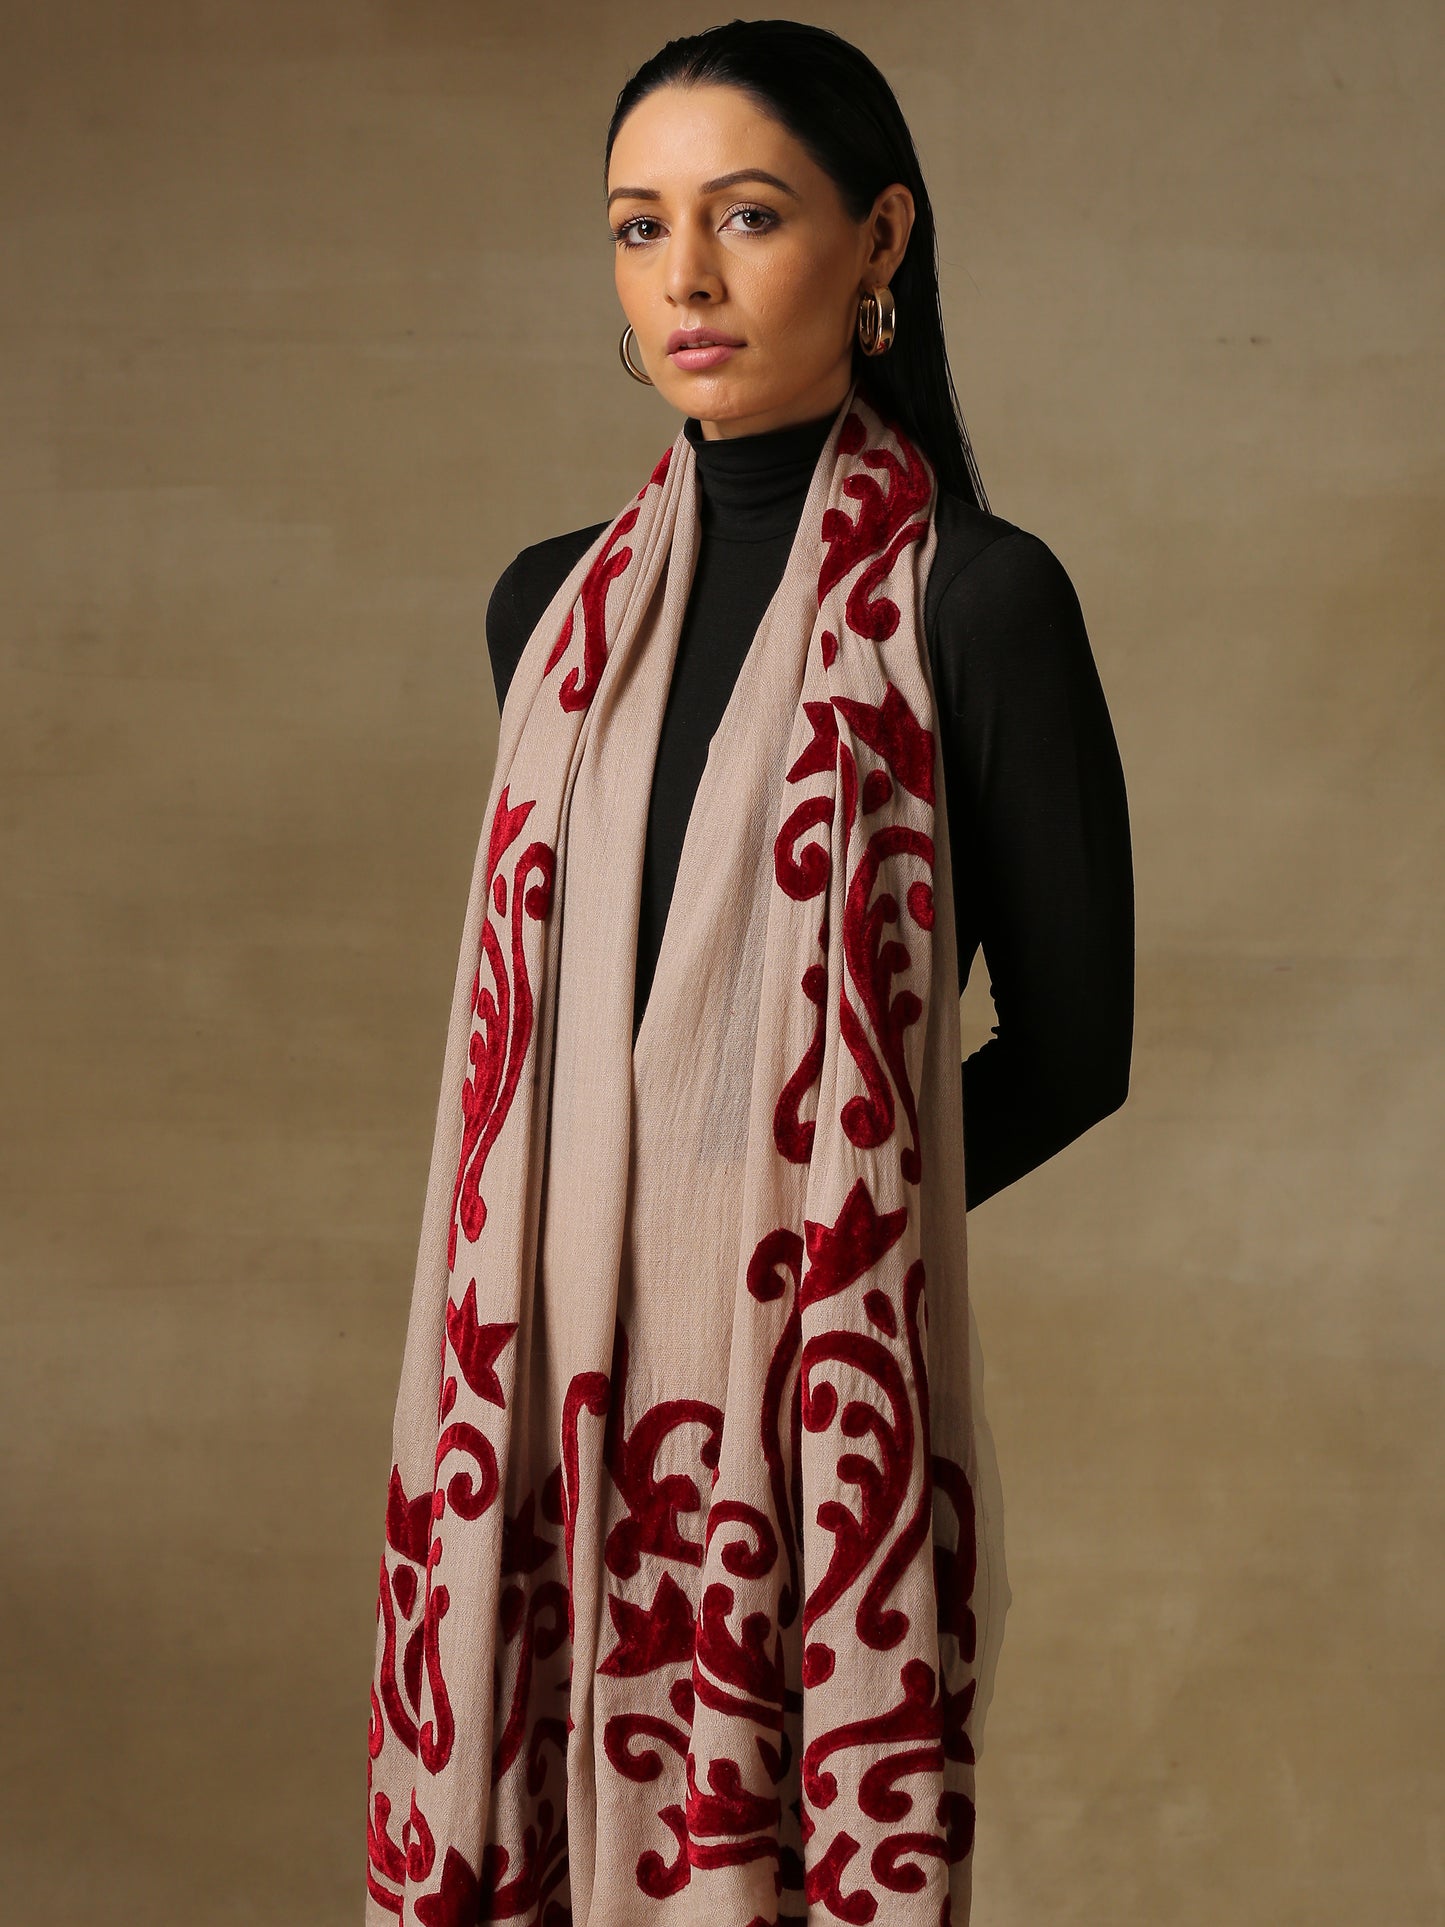 Model is wearing a Velvet Affair stole from Shaza featuring red velvet applique on a toosh coloured cashmere stole. 